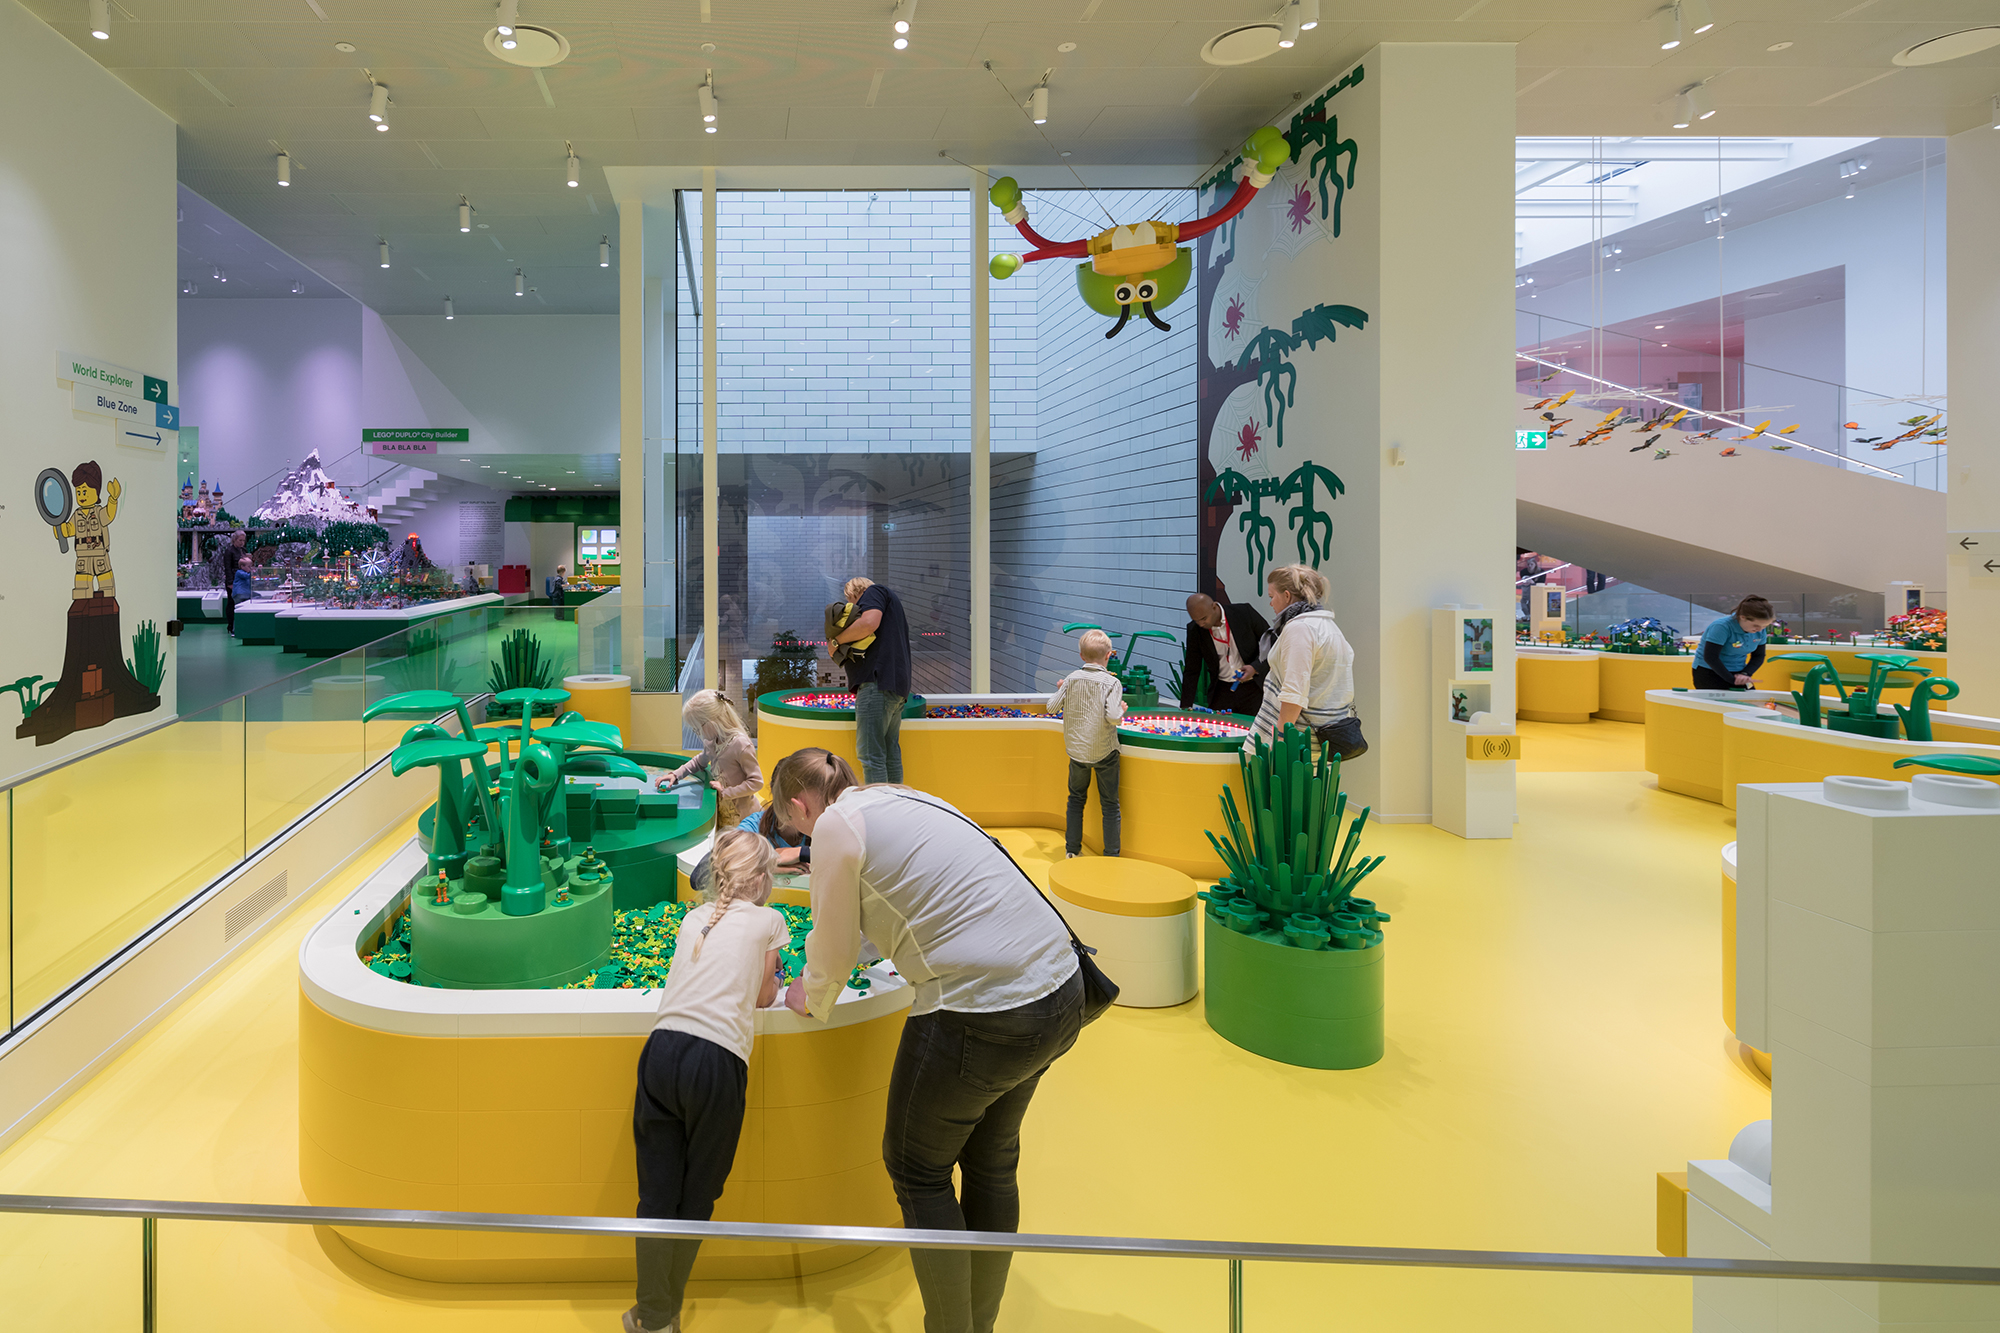 Interior of the LEGO house by BIG - Bjarke Ingles Group